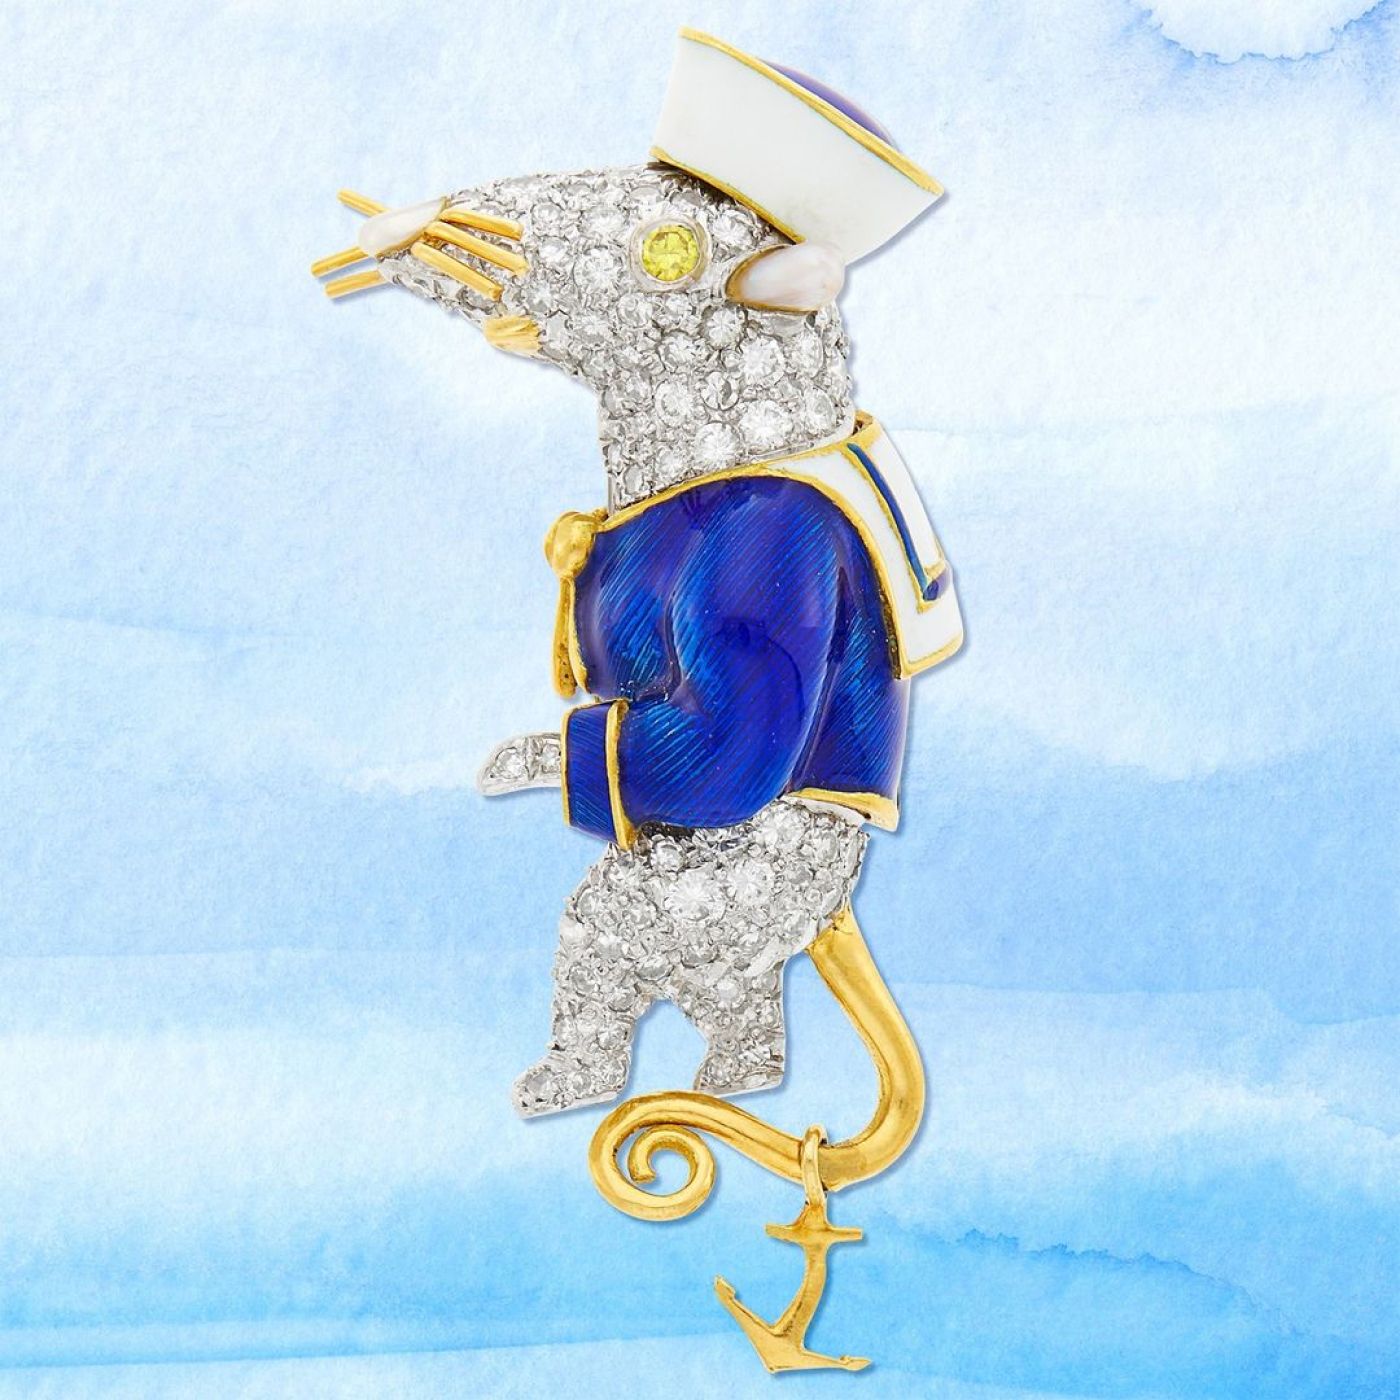 Donald Claflin brooch in gold, white gold, enamel and diamond